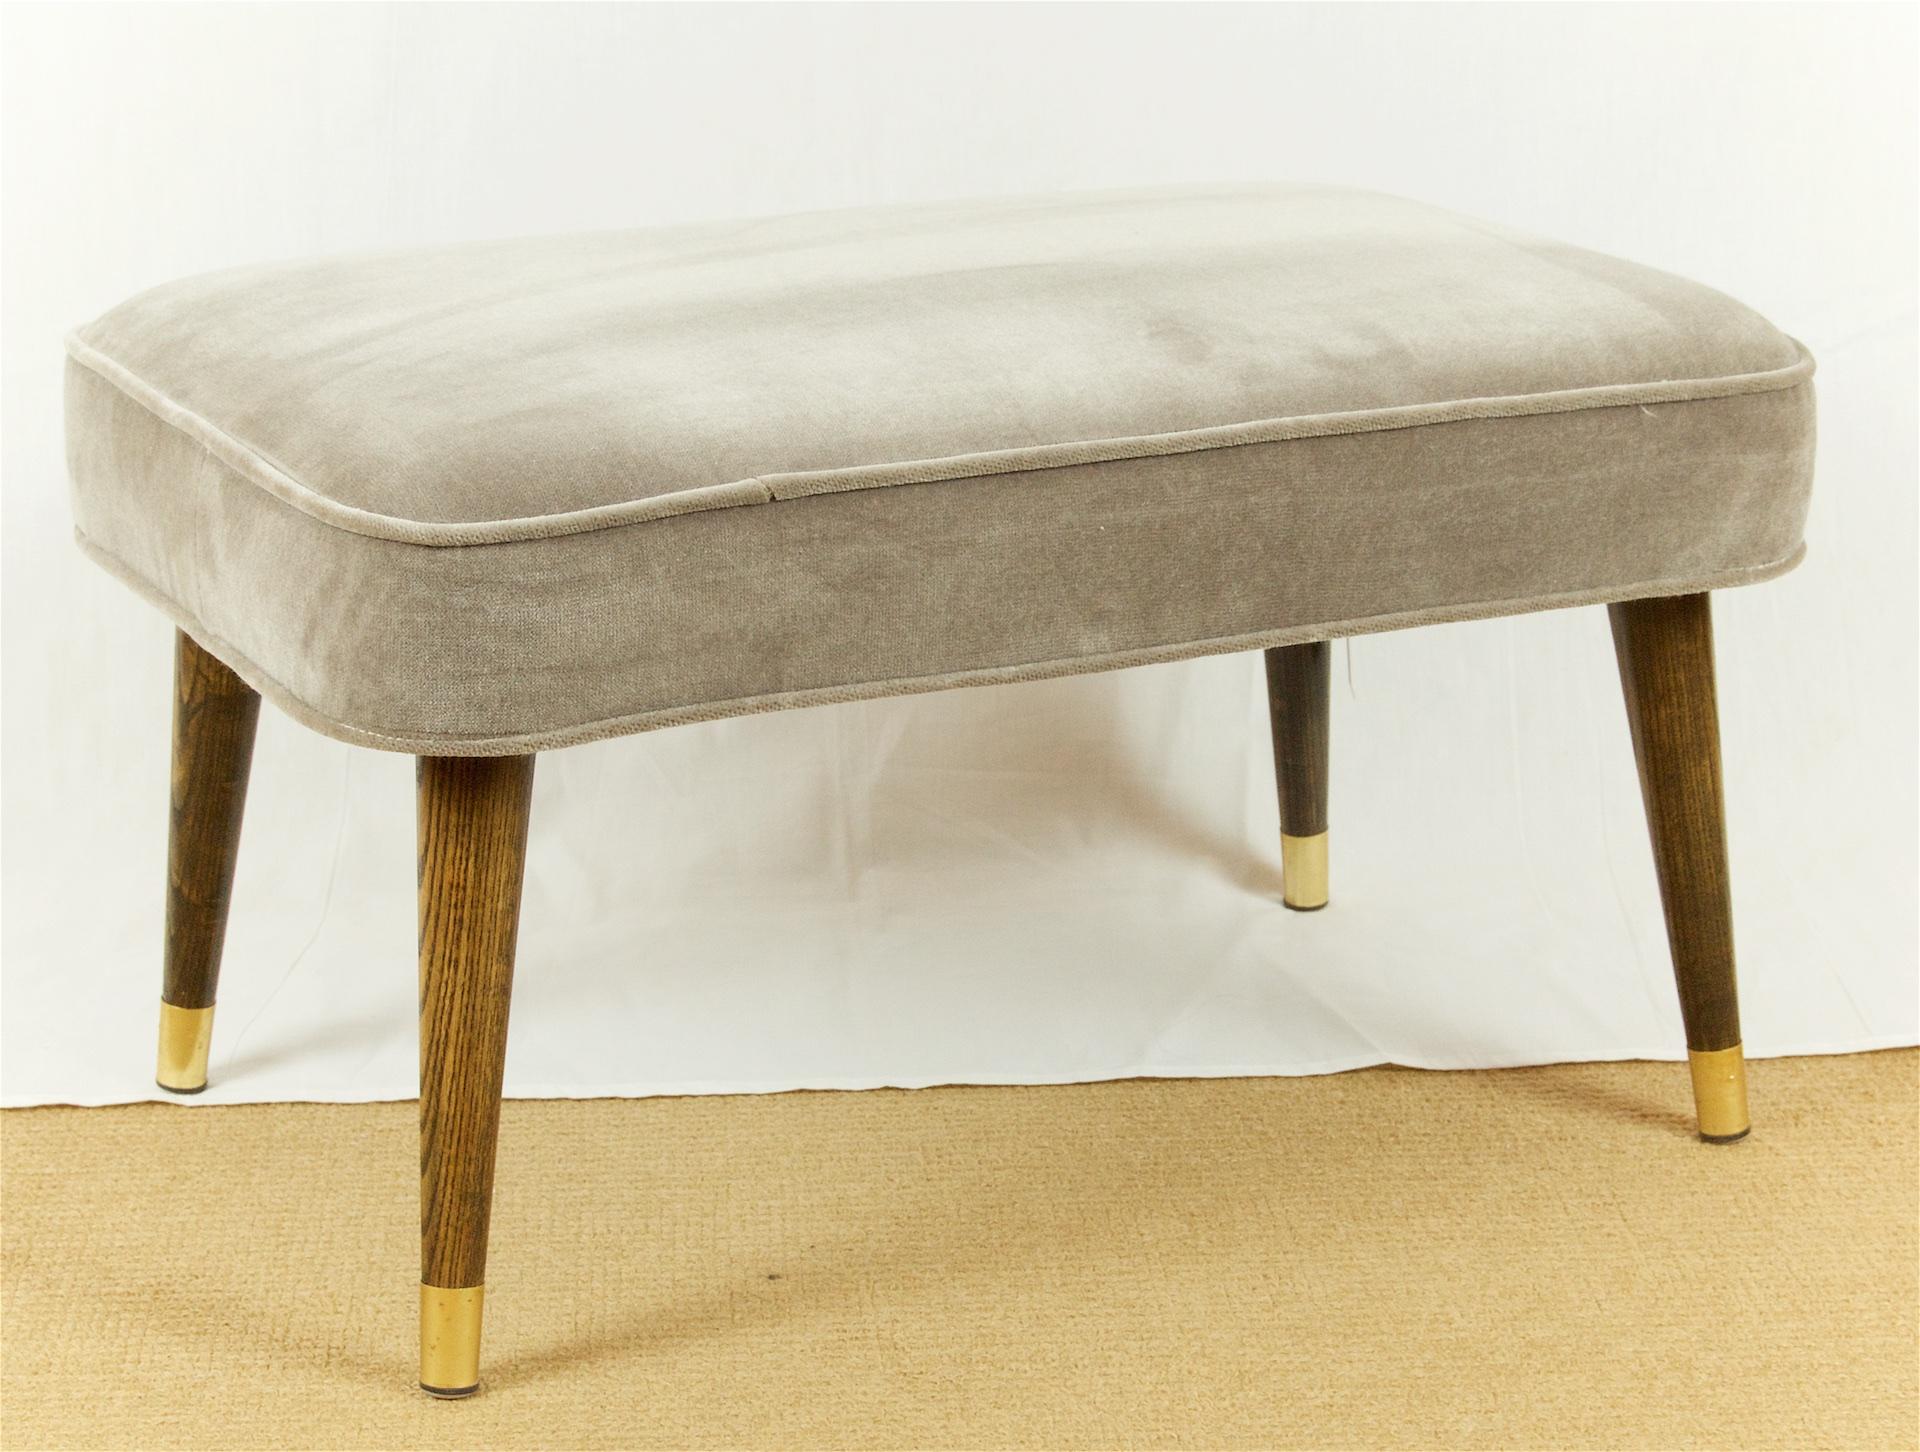 Newly reupholstered midcentury bench in grey velvet, with newly ebonized wood legs and brass ferrules.

Useful additional seating or side piece for both living and bedrooms.